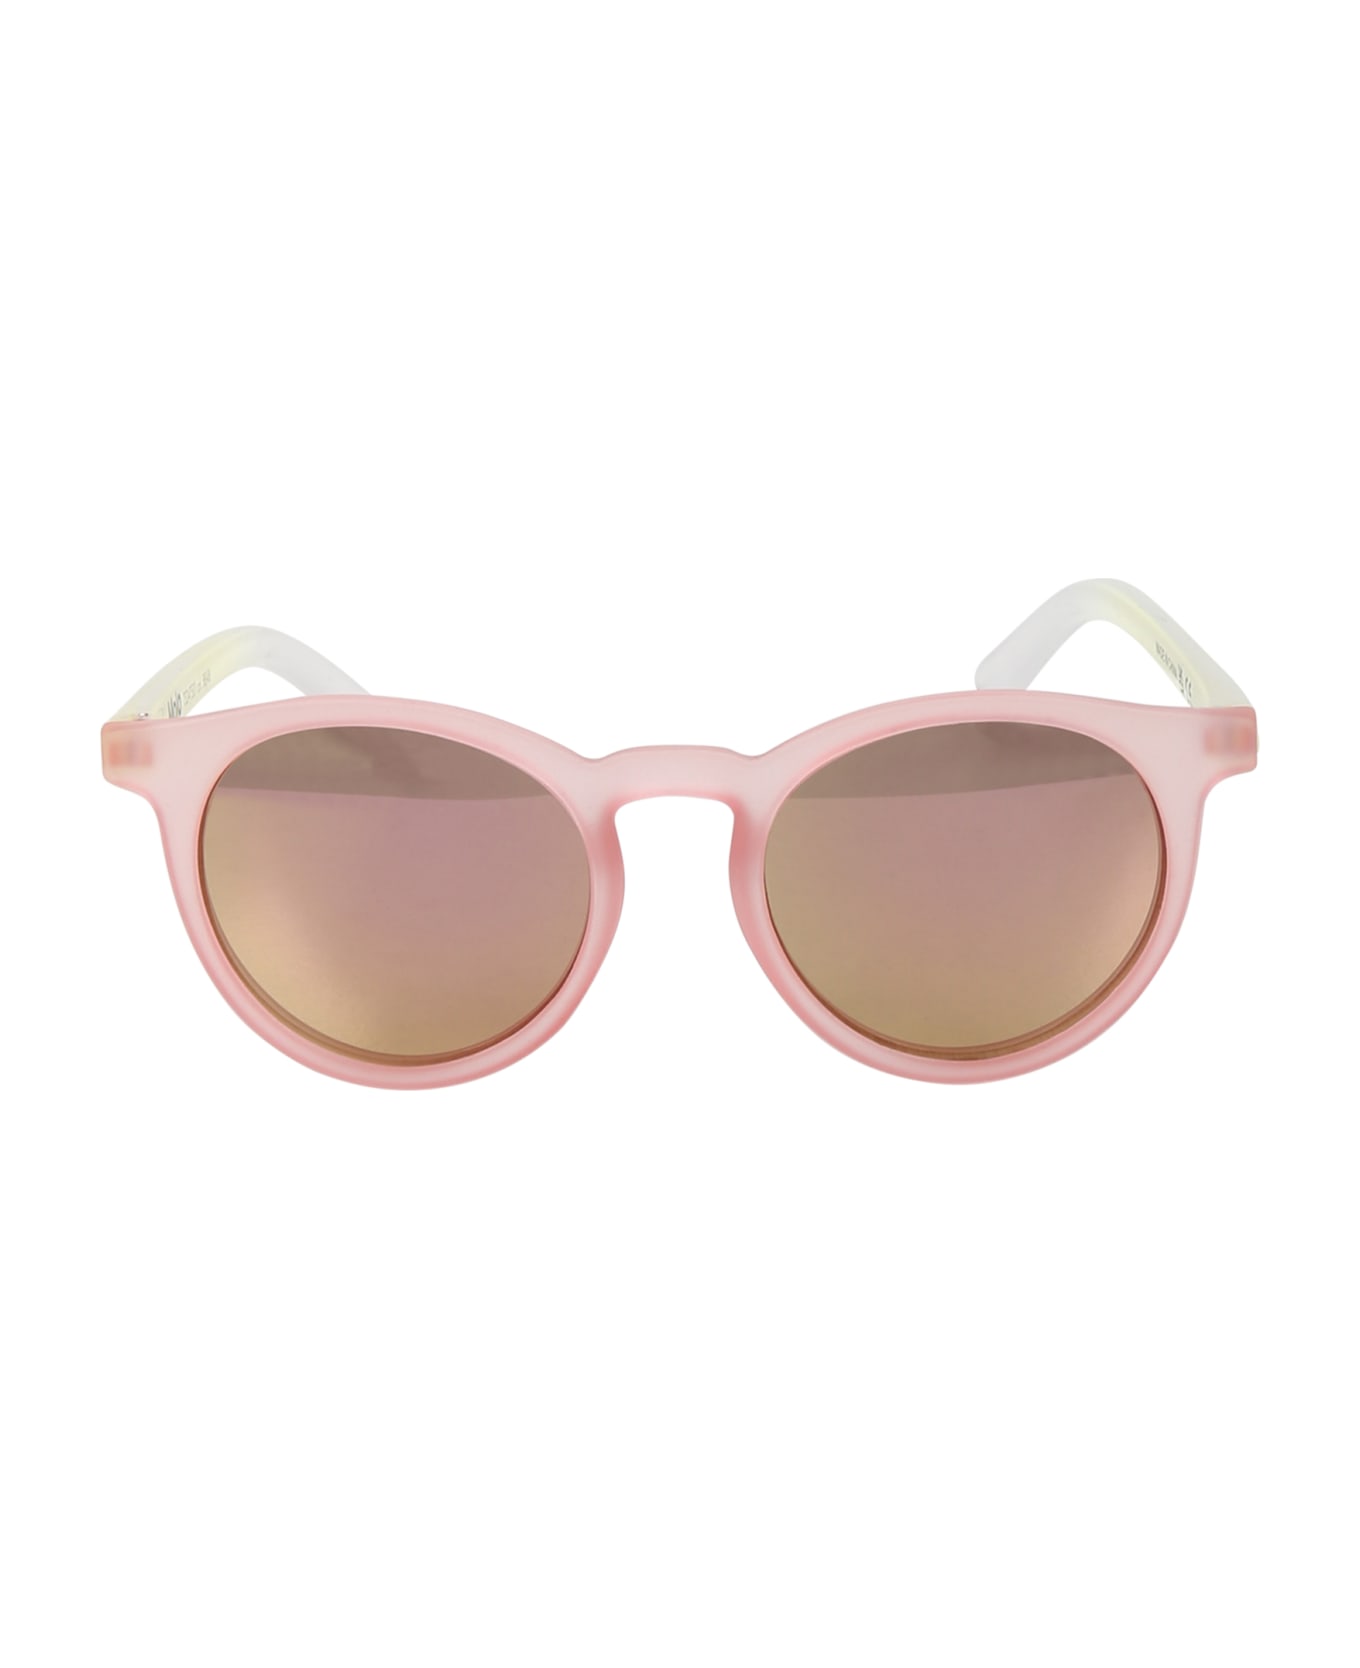 Molo Pink Sunshine Sunglasses For Girl - Pink アクセサリー＆ギフト